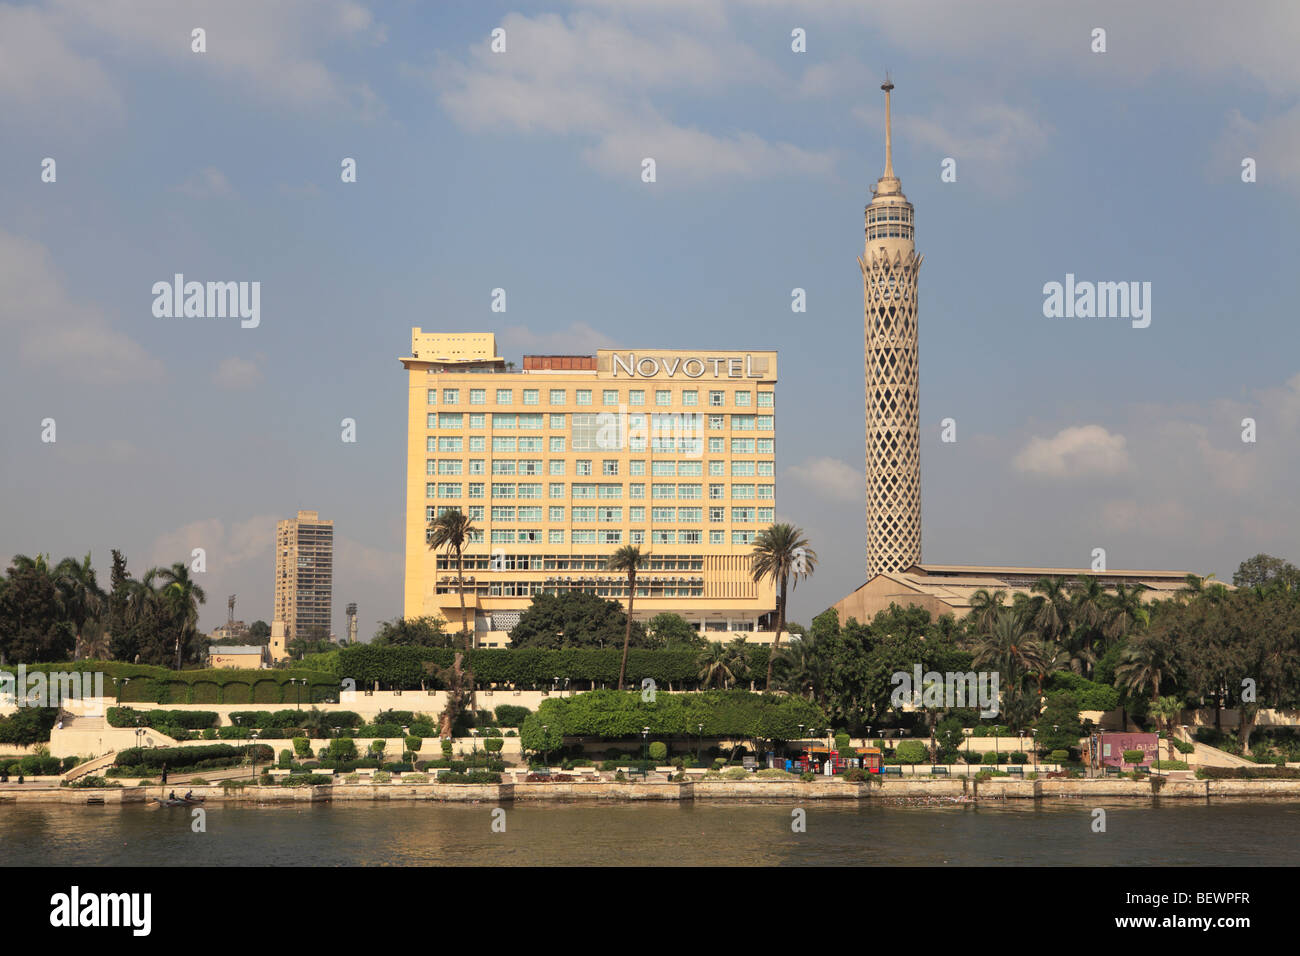 View across the Nile River to the Cairo Tower (right) and Novotel hotel - Cairo, Egypt. Stock Photo